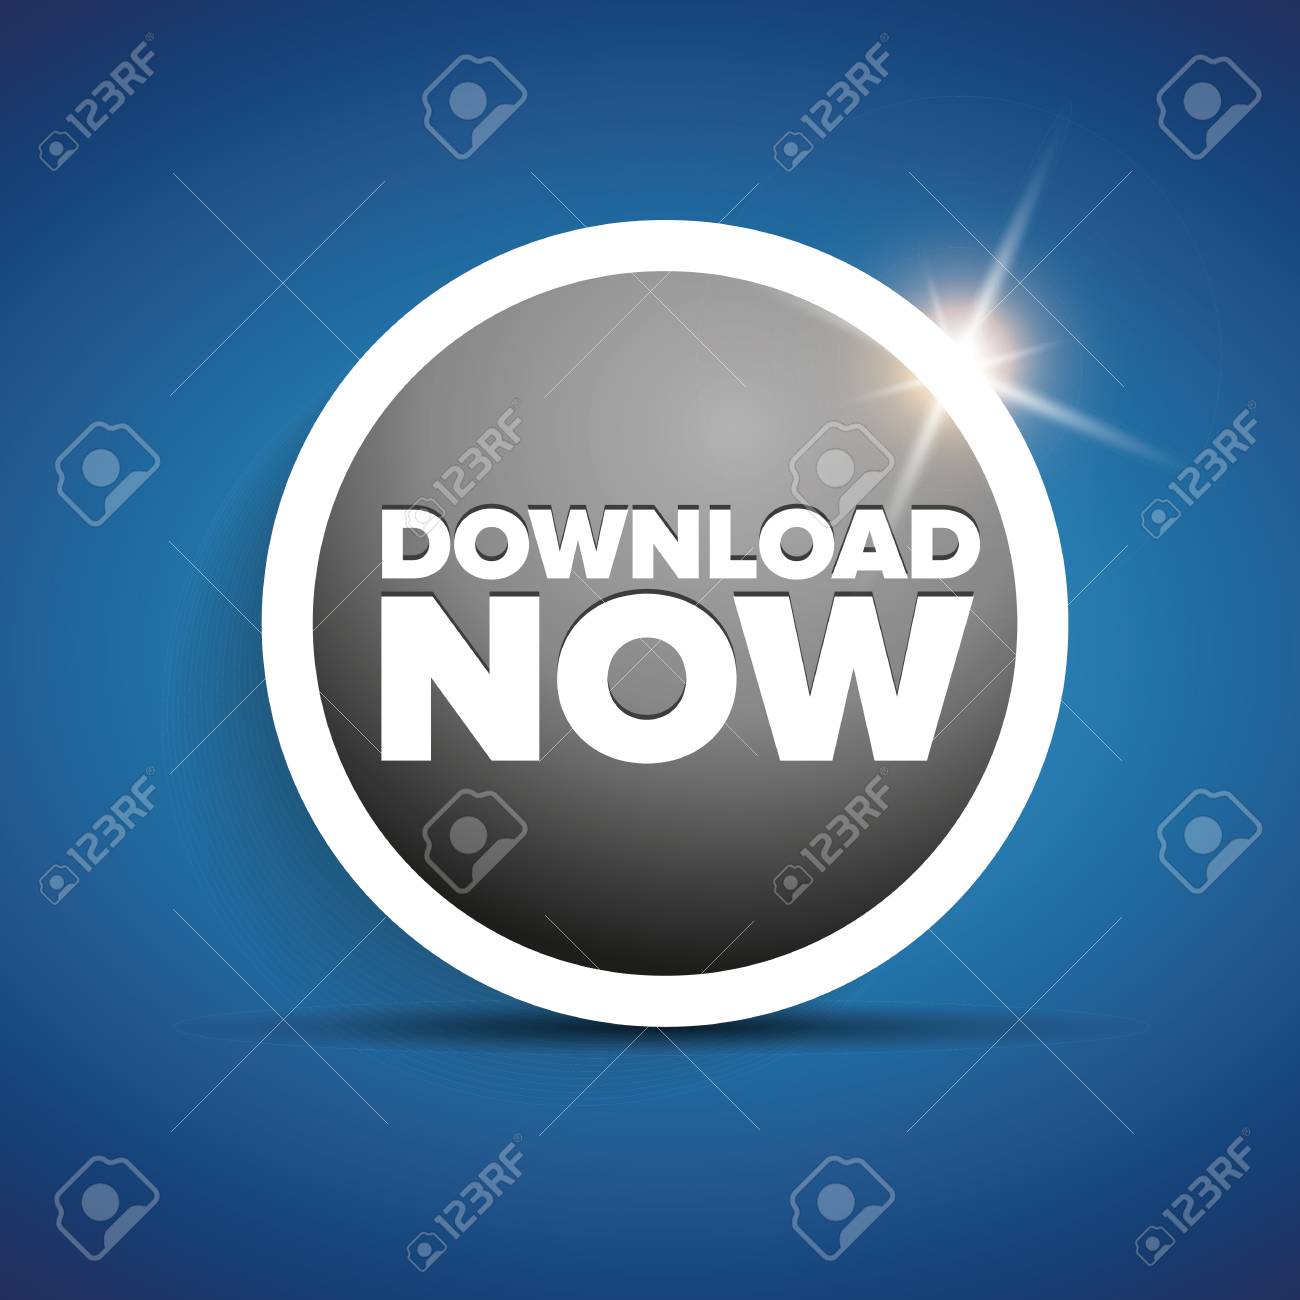 Download now button with shine Stock Vector - 37054996